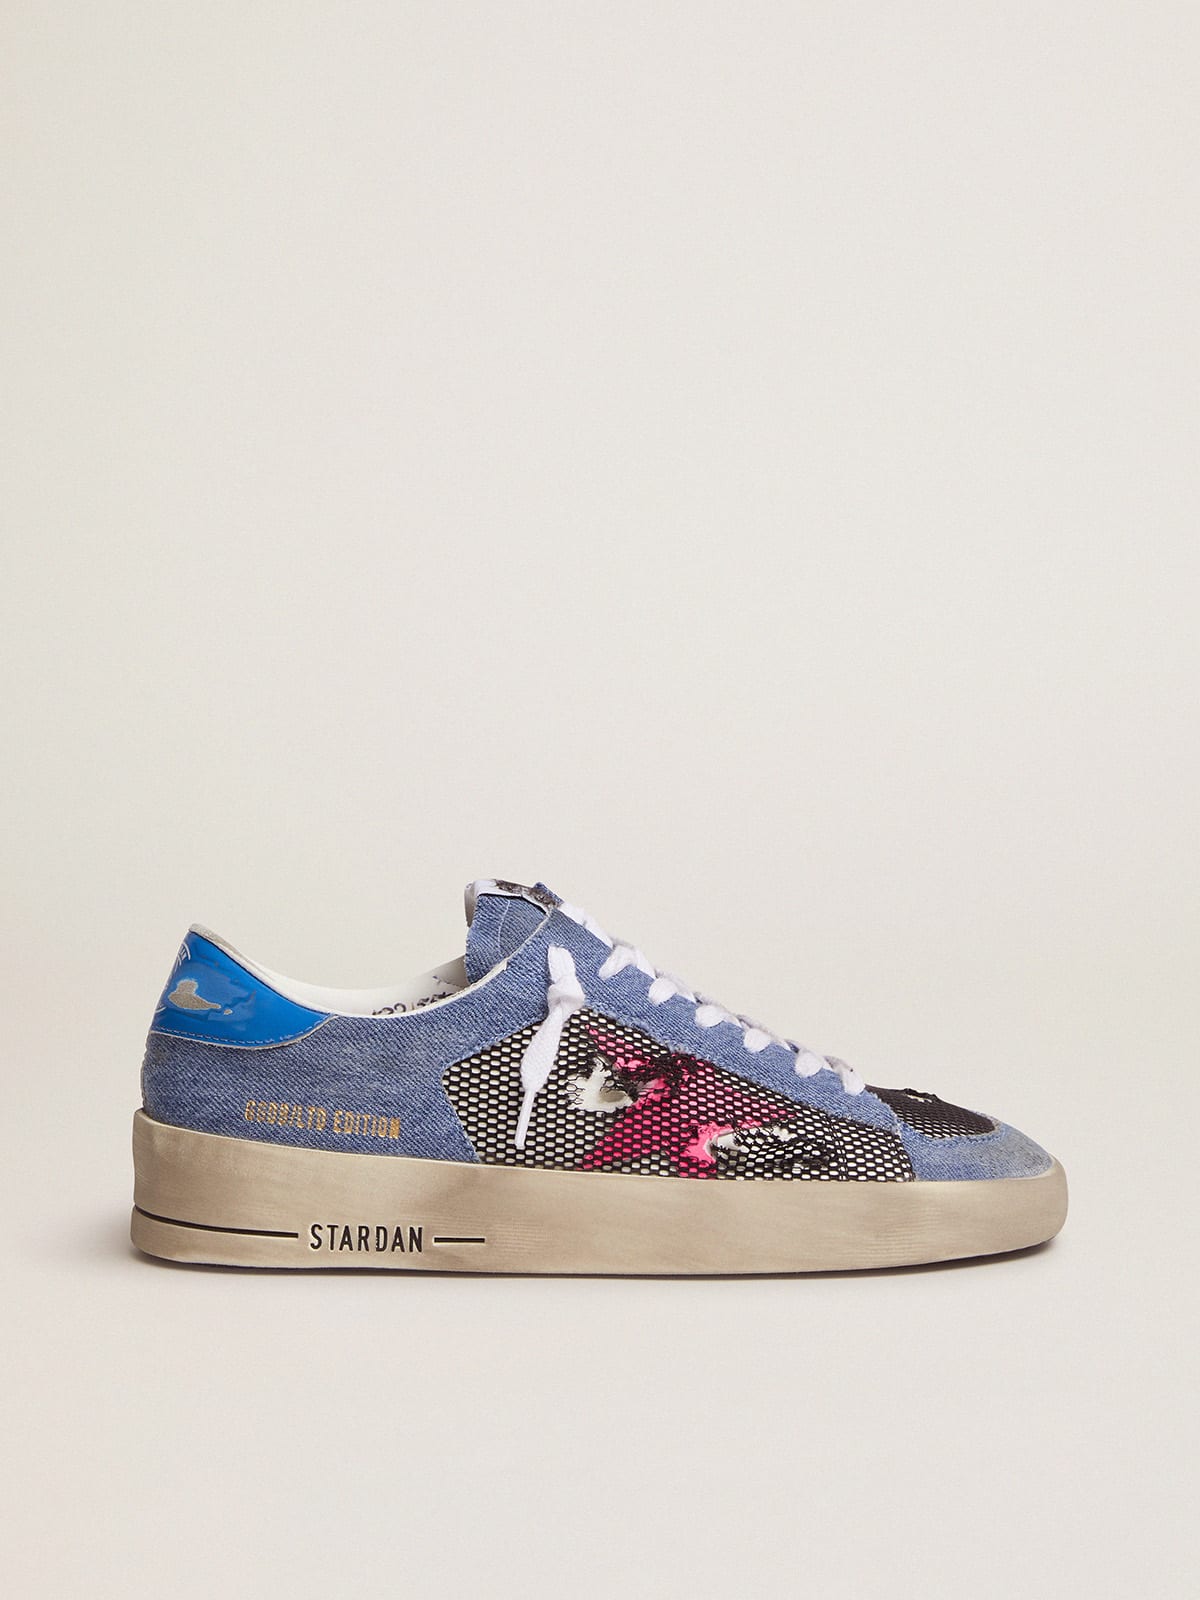 Golden Goose - Women's Limited Edition LAB denim Stardan sneakers with fuchsia star in 